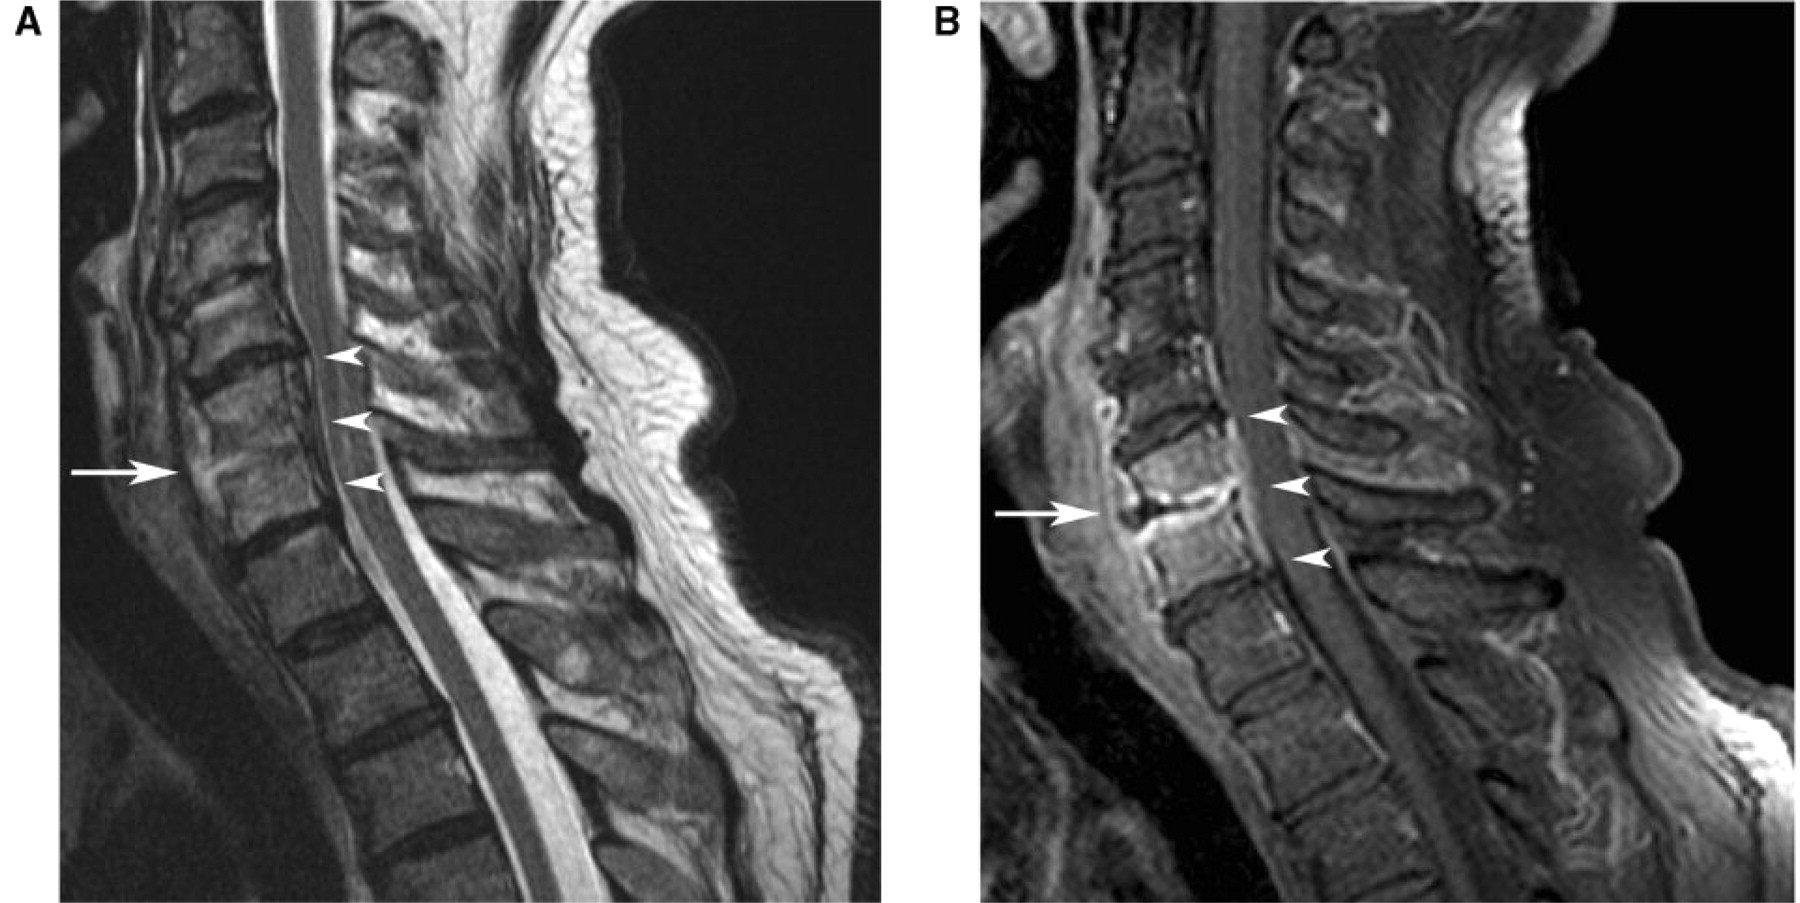 MRI images of a spinal epidural abscess that is causing spinal cord compression (source)